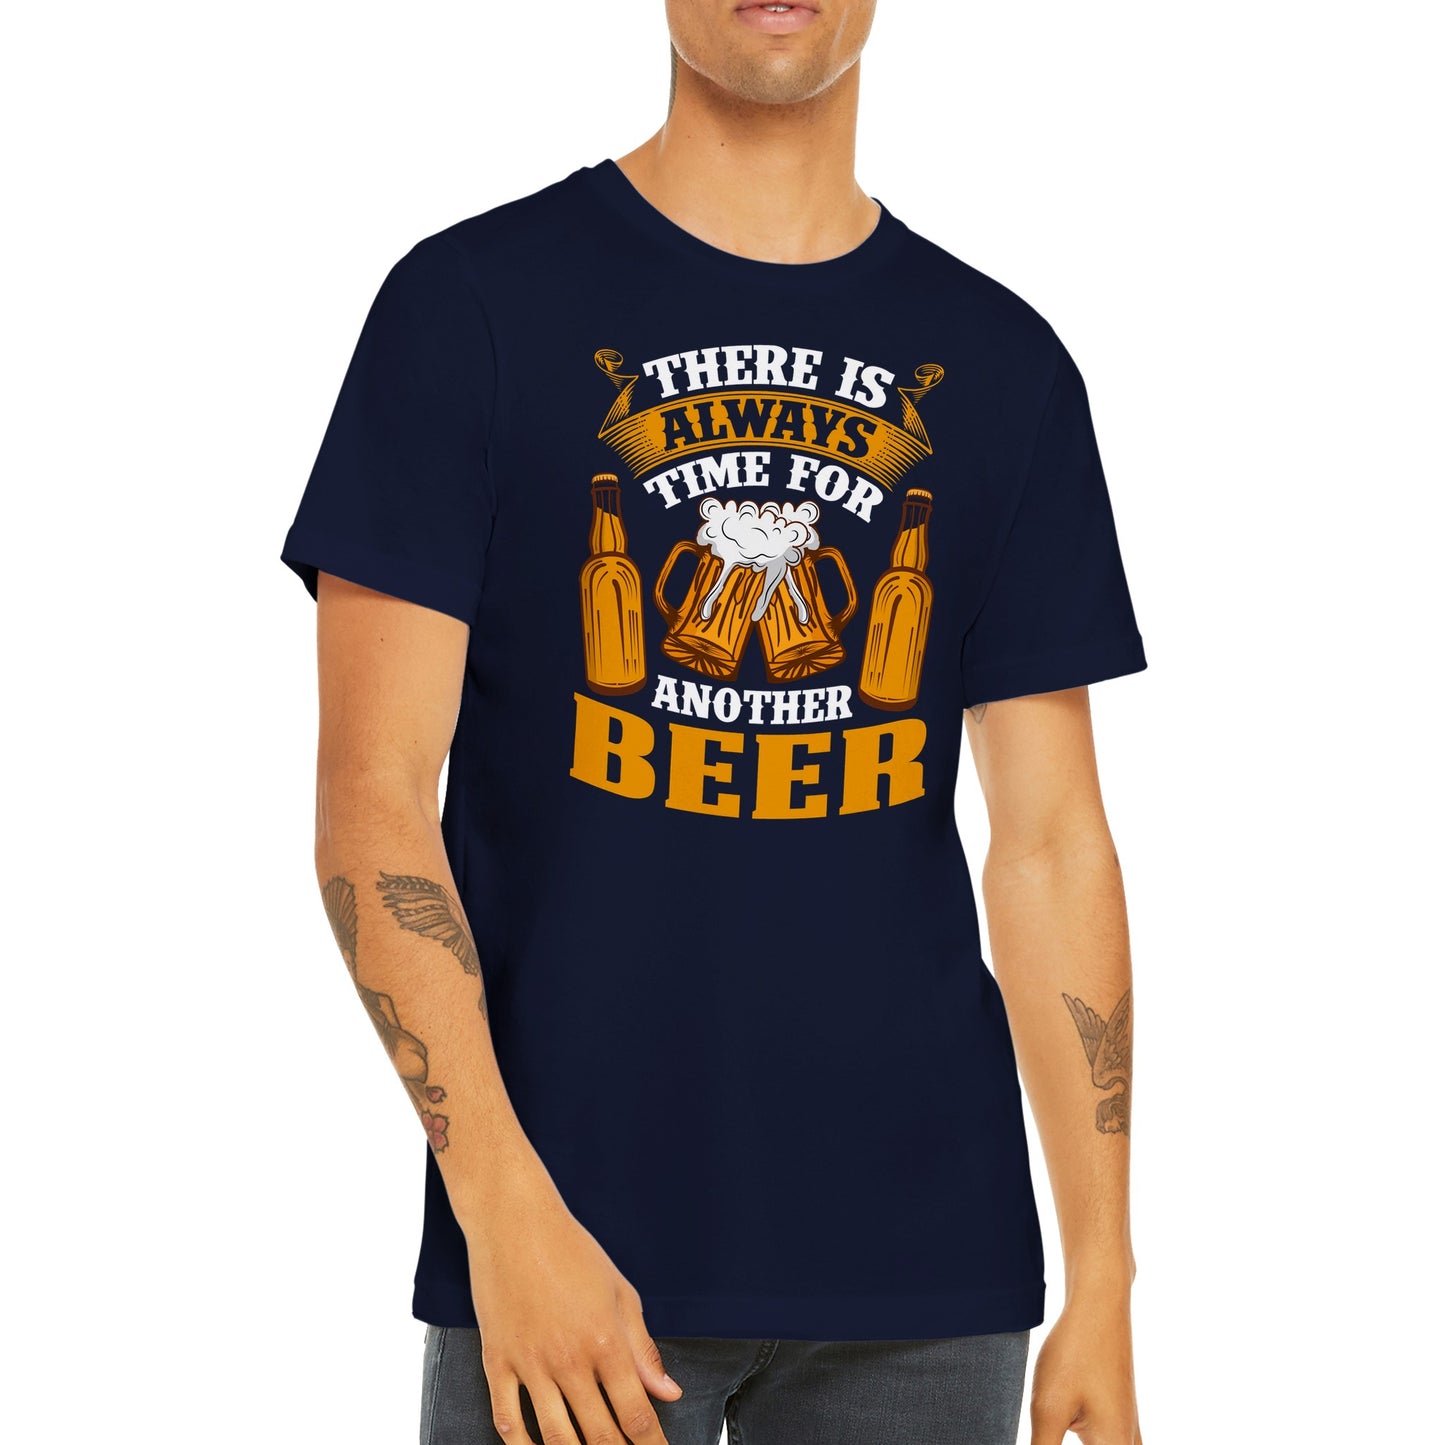 Funny T-Shirts - There Is Always Time For Another Beer - Premium Unisex T-Shirt 